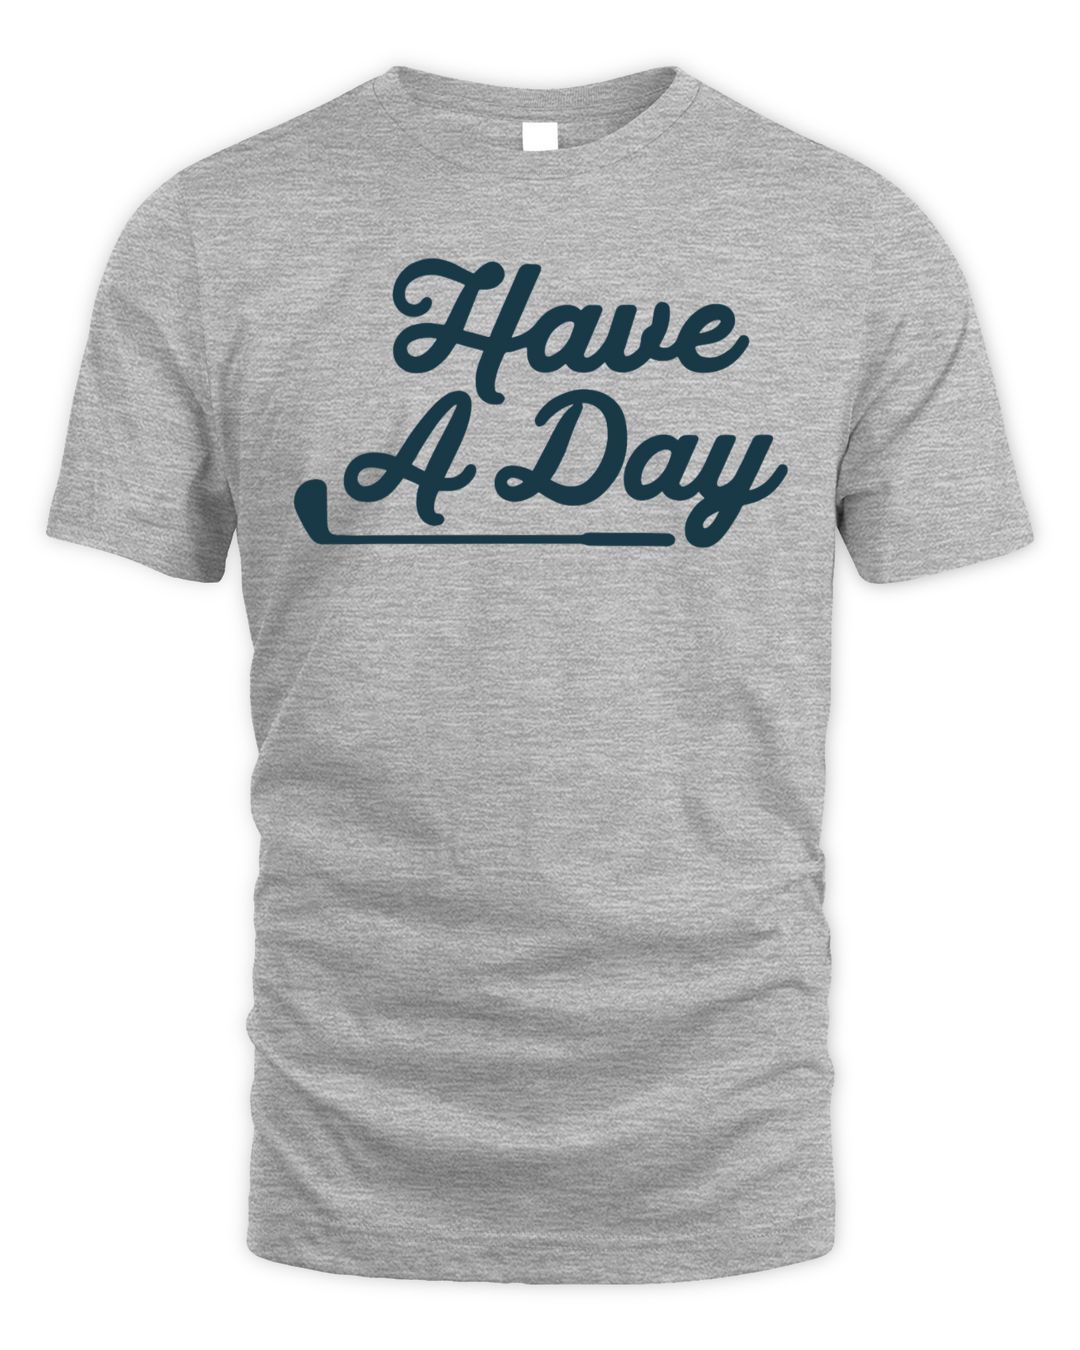 Bob Does Sports Merch Have A Day Shirt